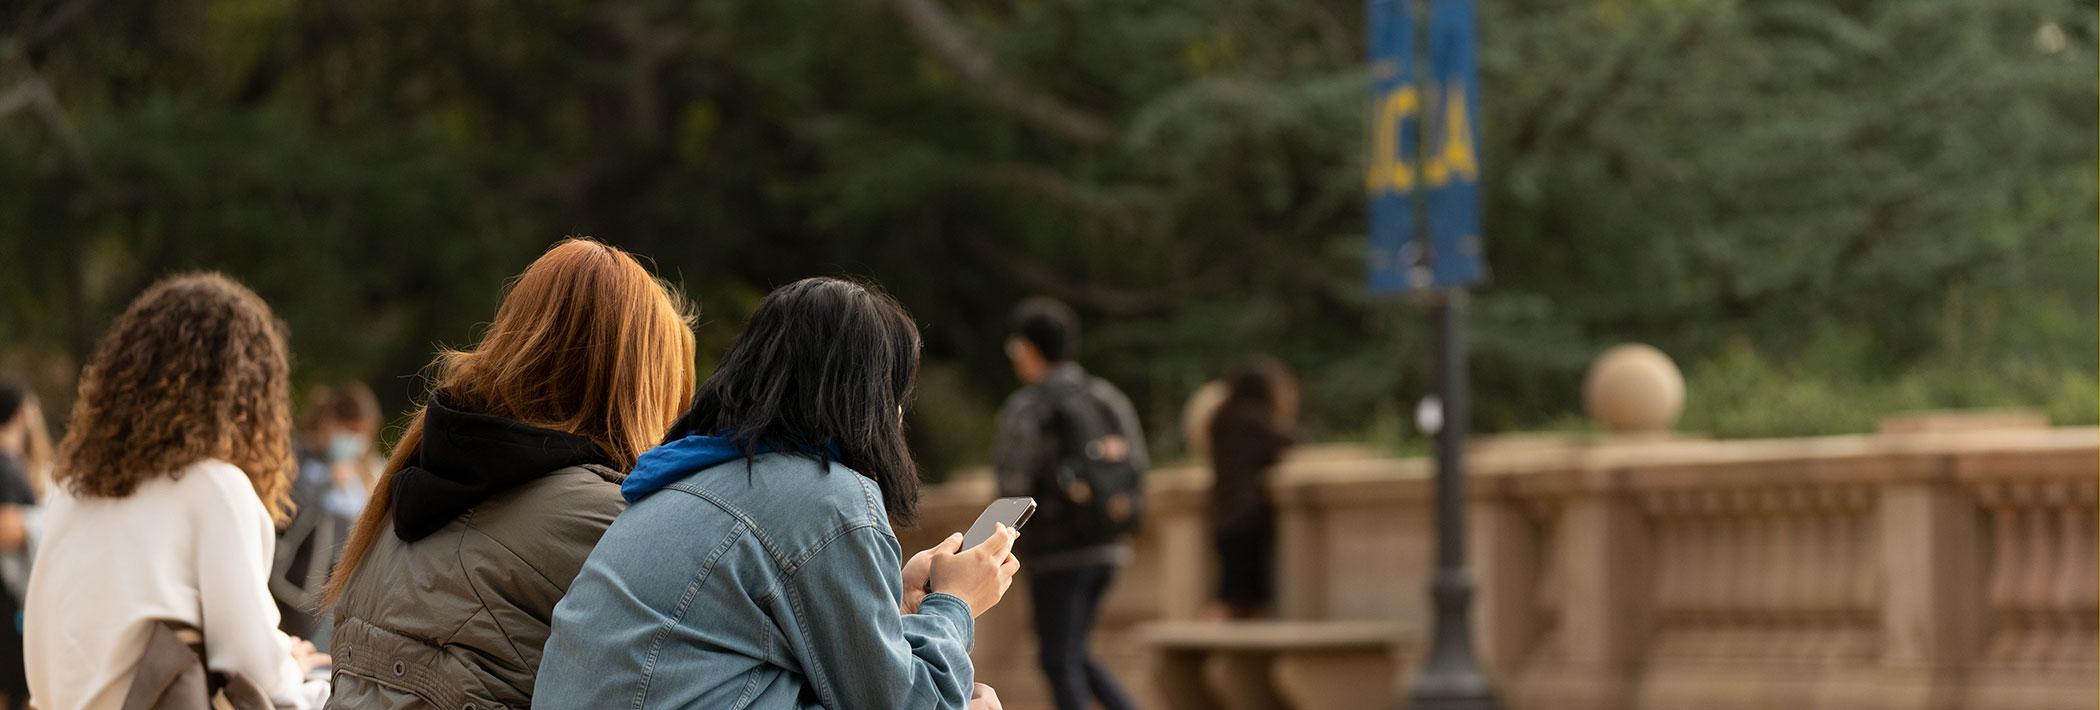 UCLA students using their smartphones 